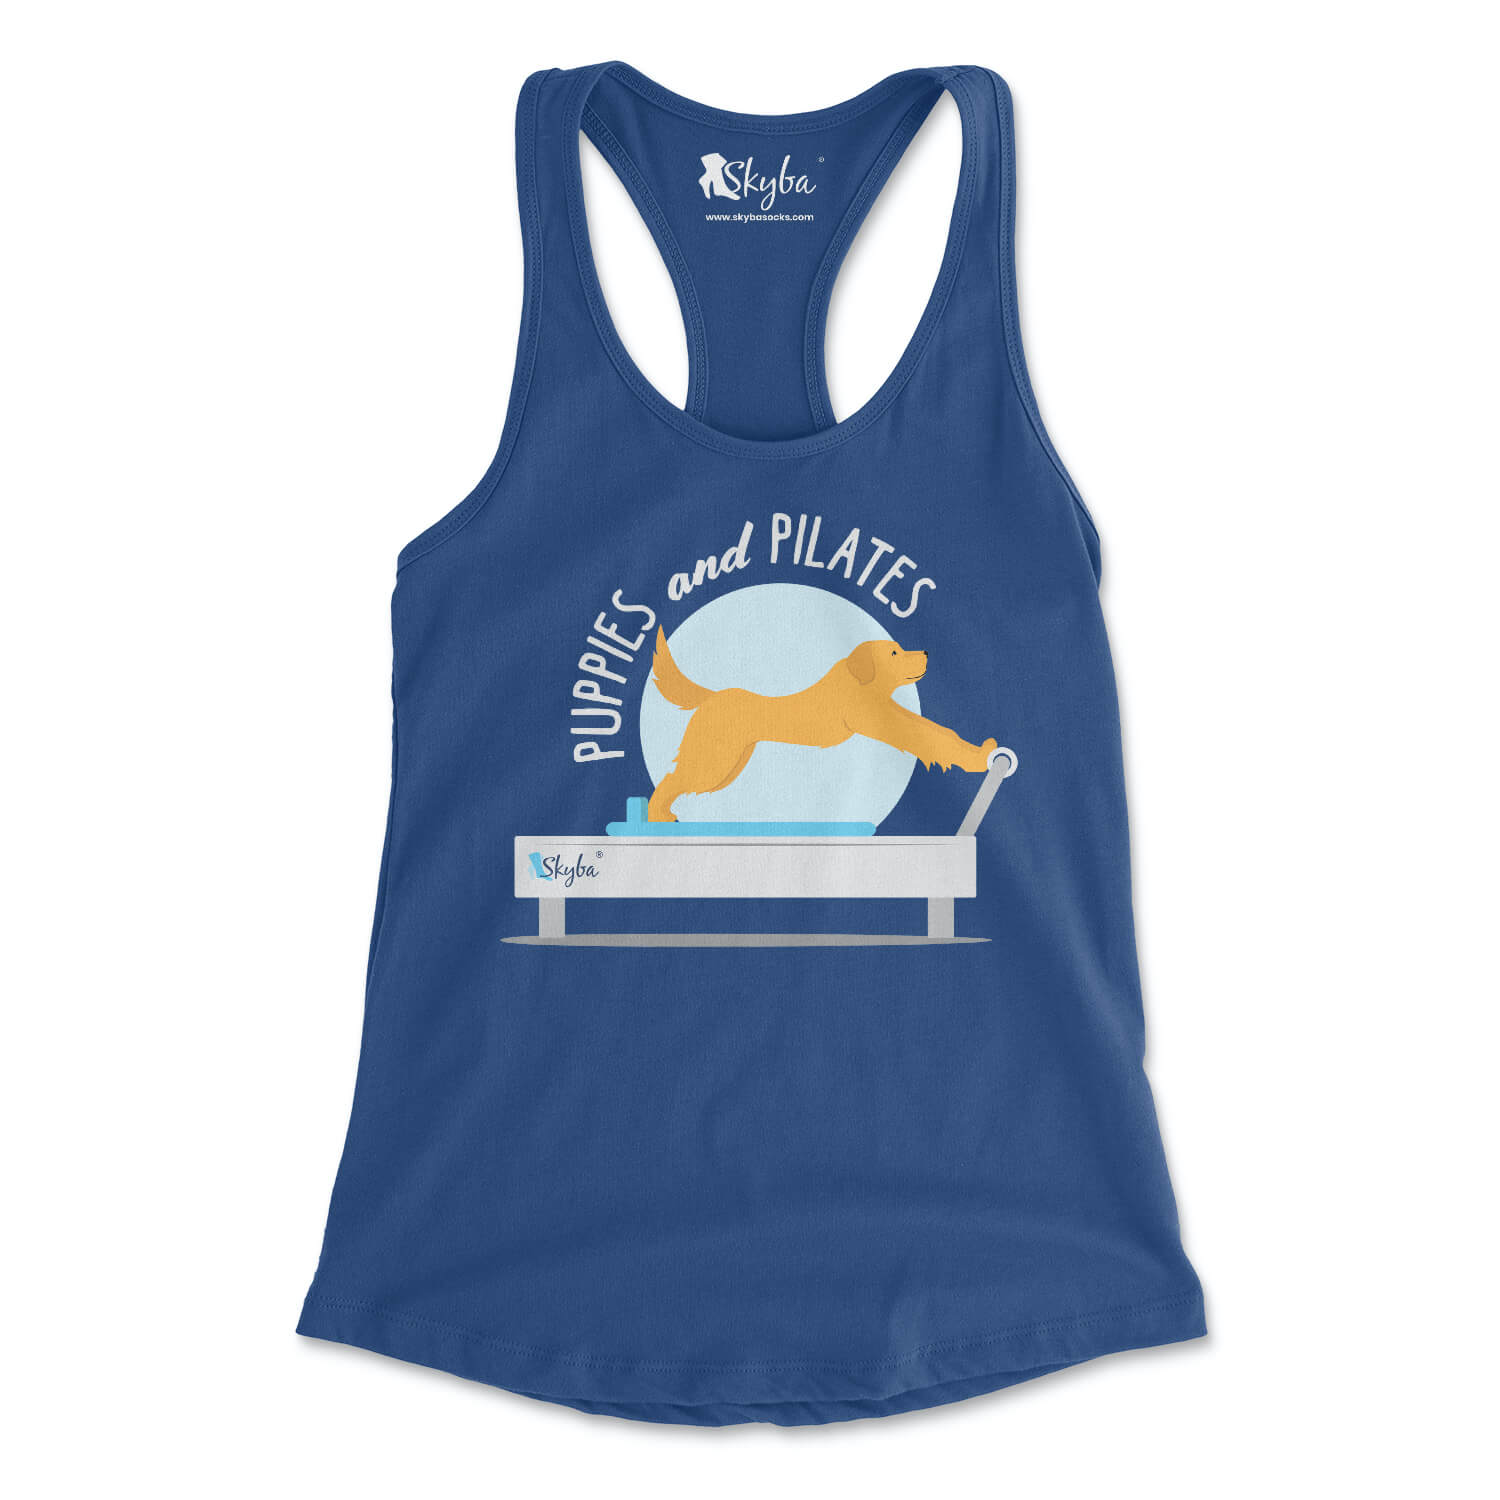 "Puppies and Pilates" Golden Retriever on Reformer - Women's Slim Fit Tank Skyba Tank Top